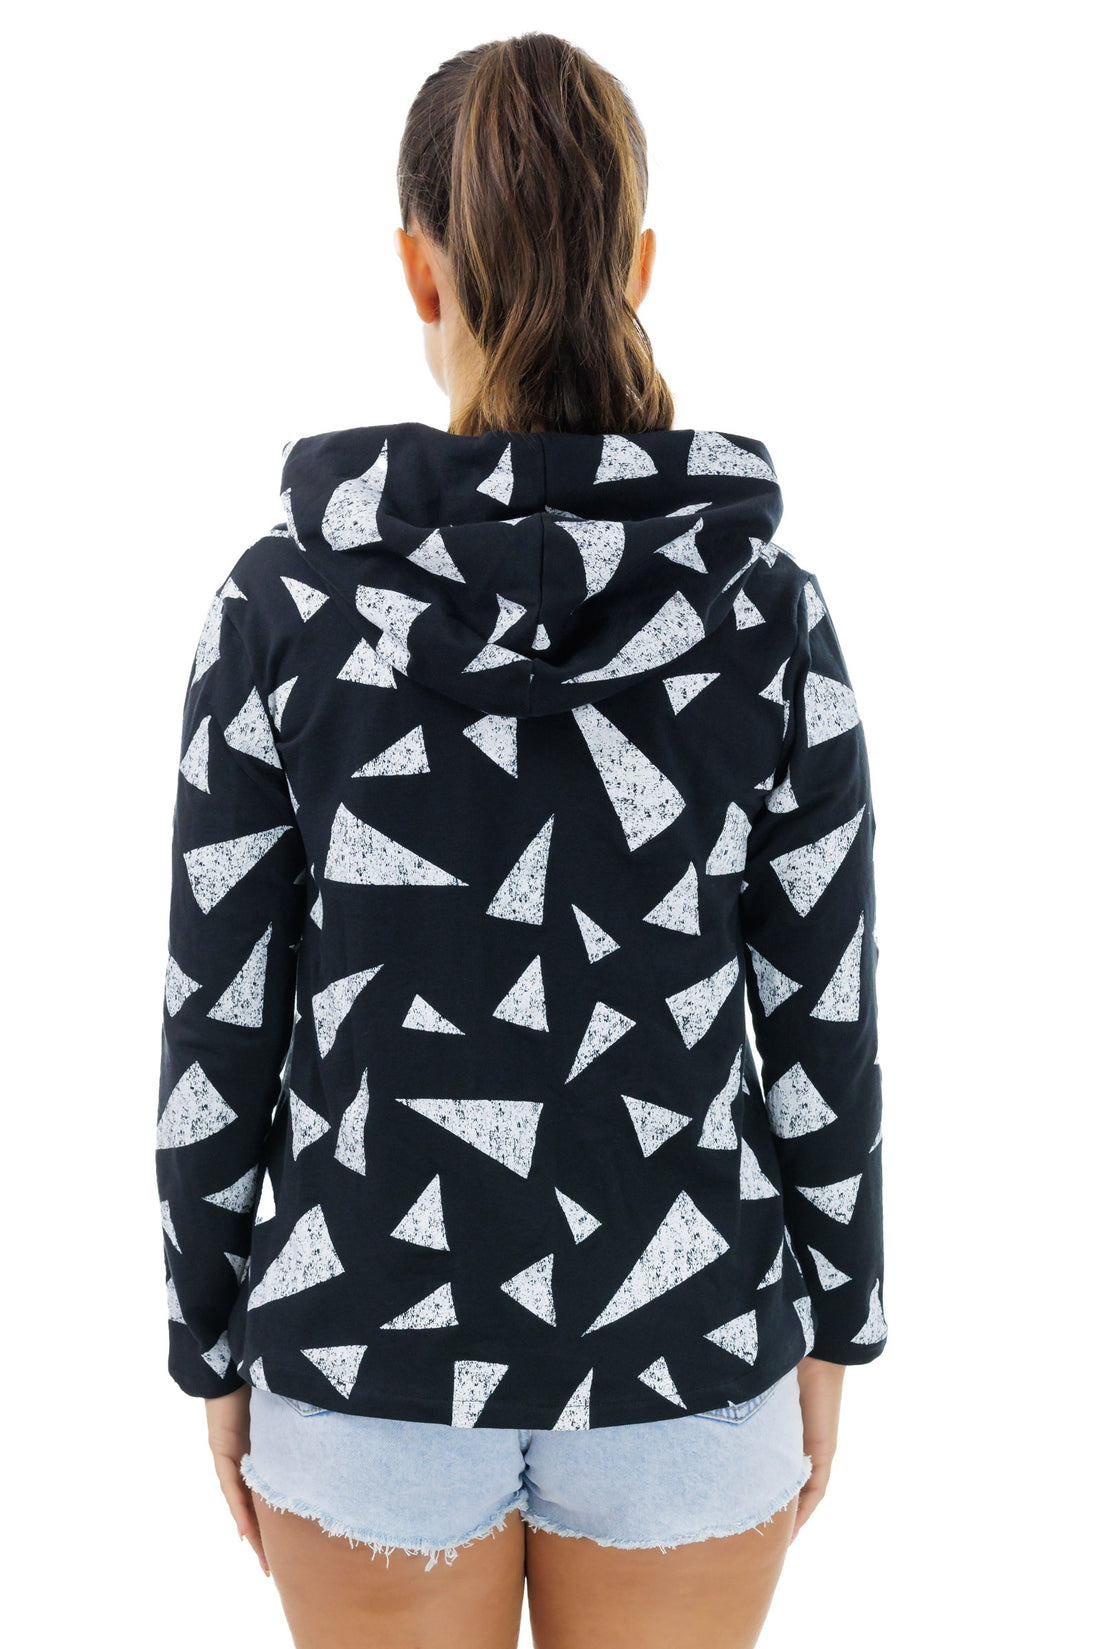 Triangle Slices Hoodie